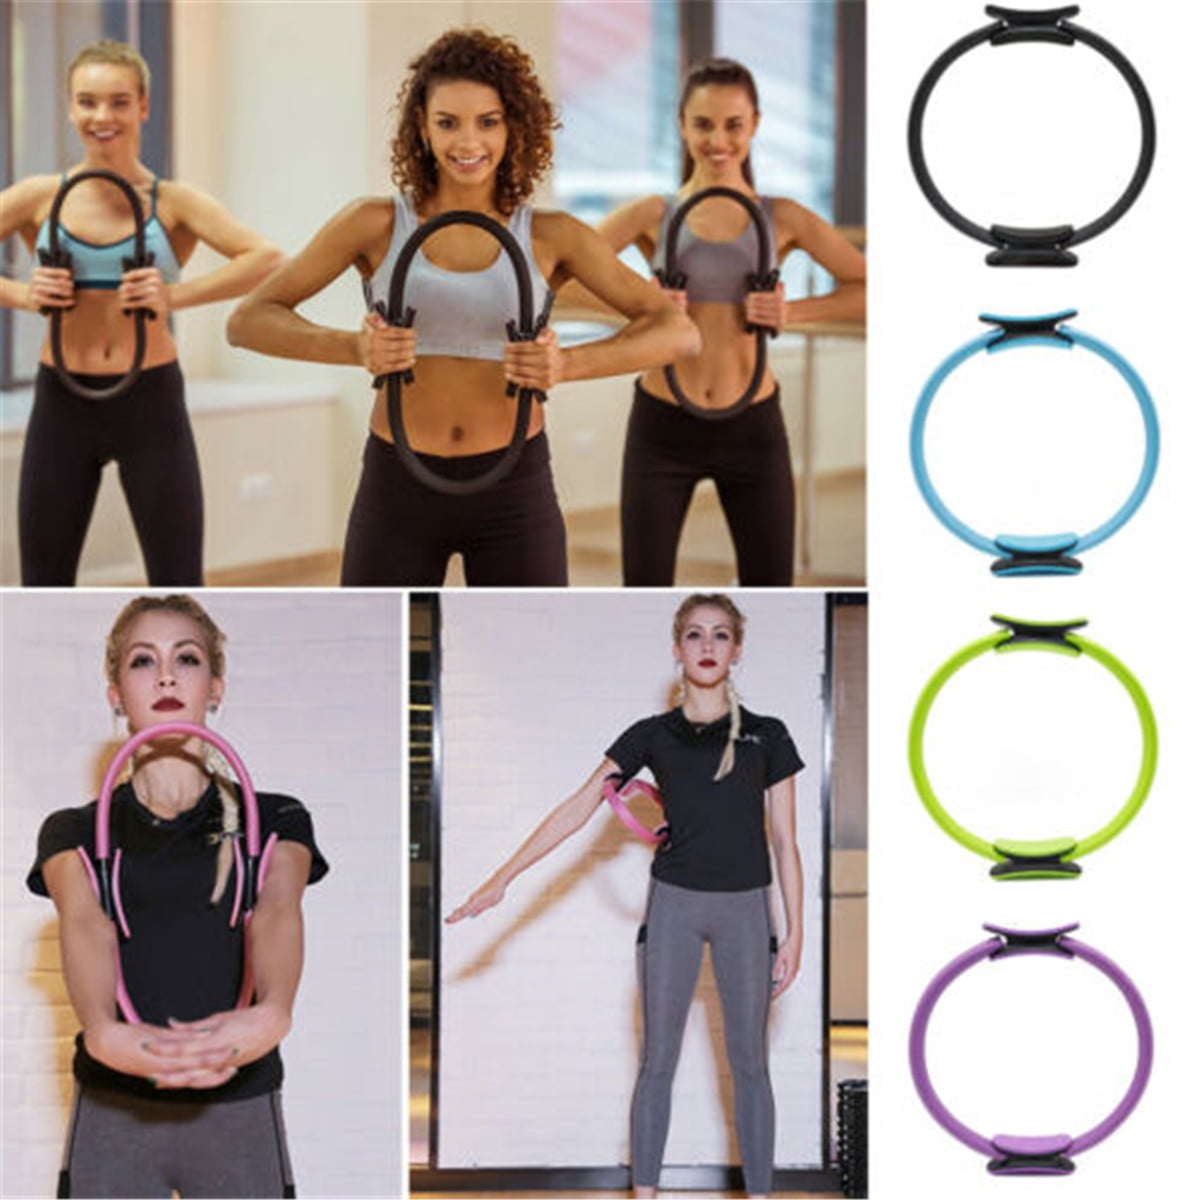 Pilates Ring Unbreakable Fitness Yoga Ring Power Resistance Exercise Circle for Shaping and Fitness